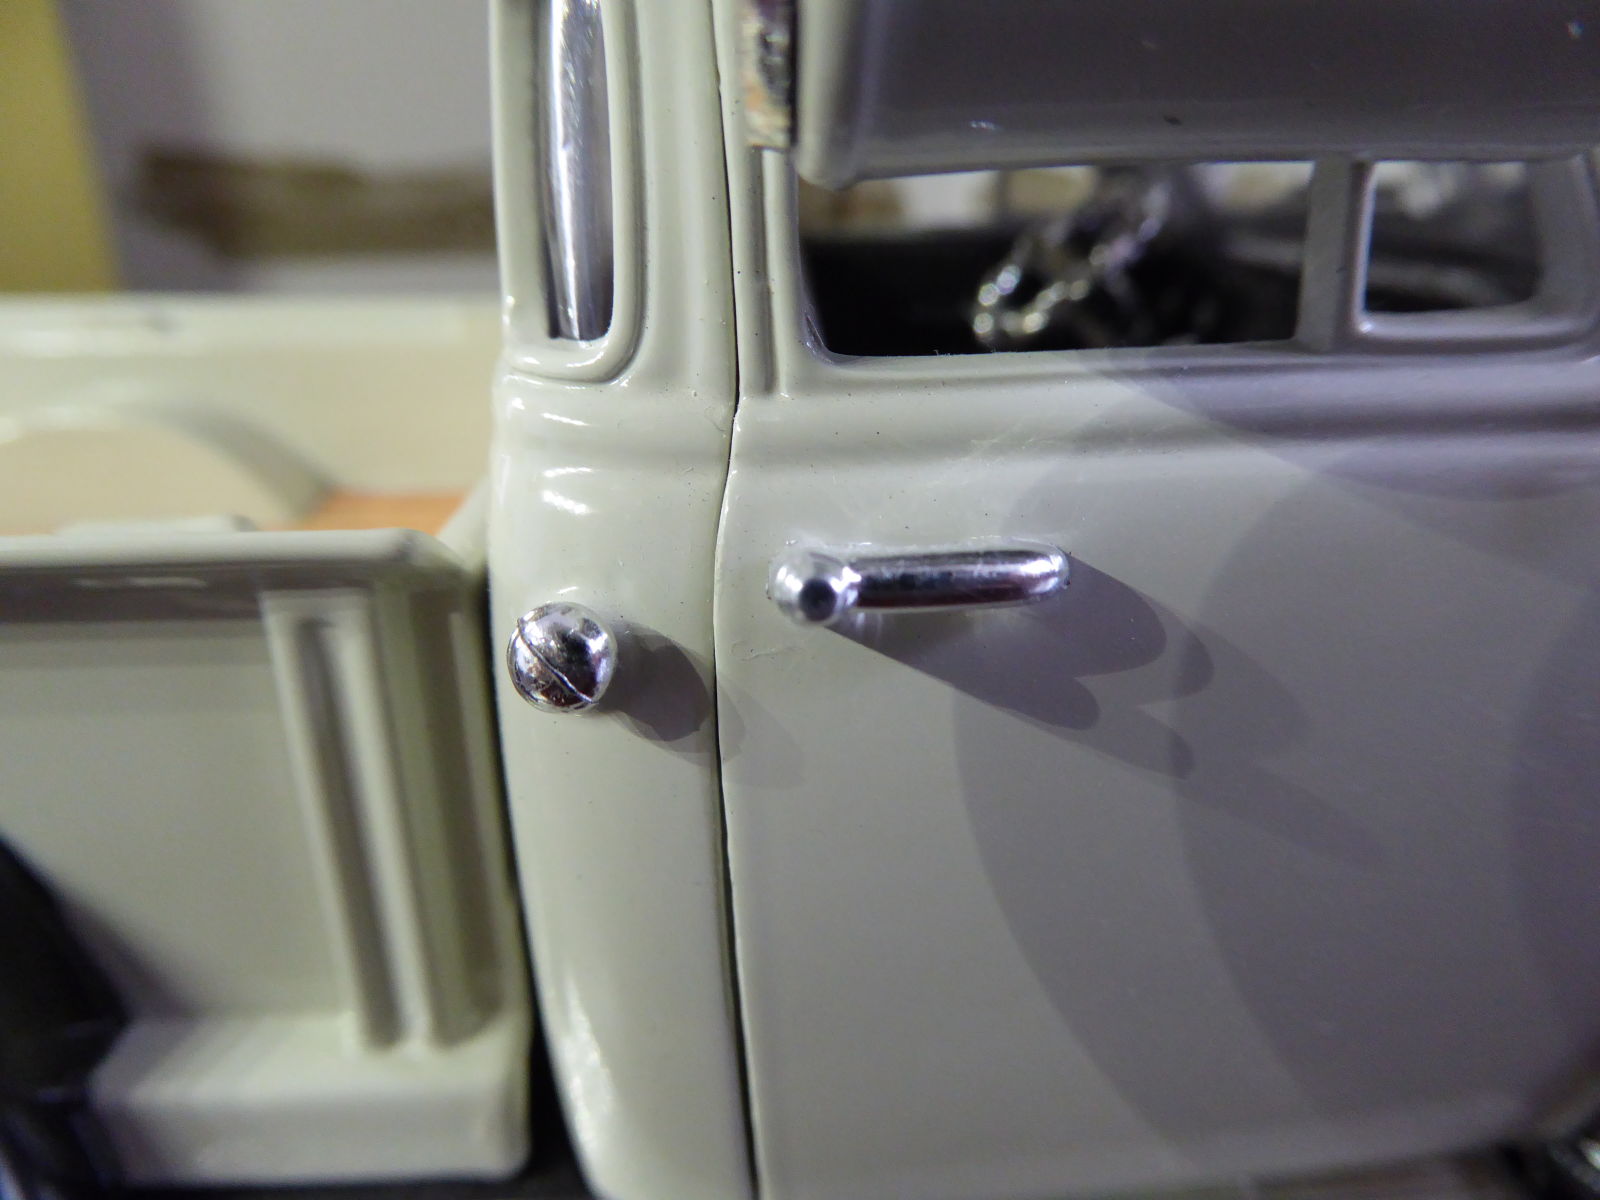 Gas cap and door handles are separate parts. No gap on the door when pictured in close up.